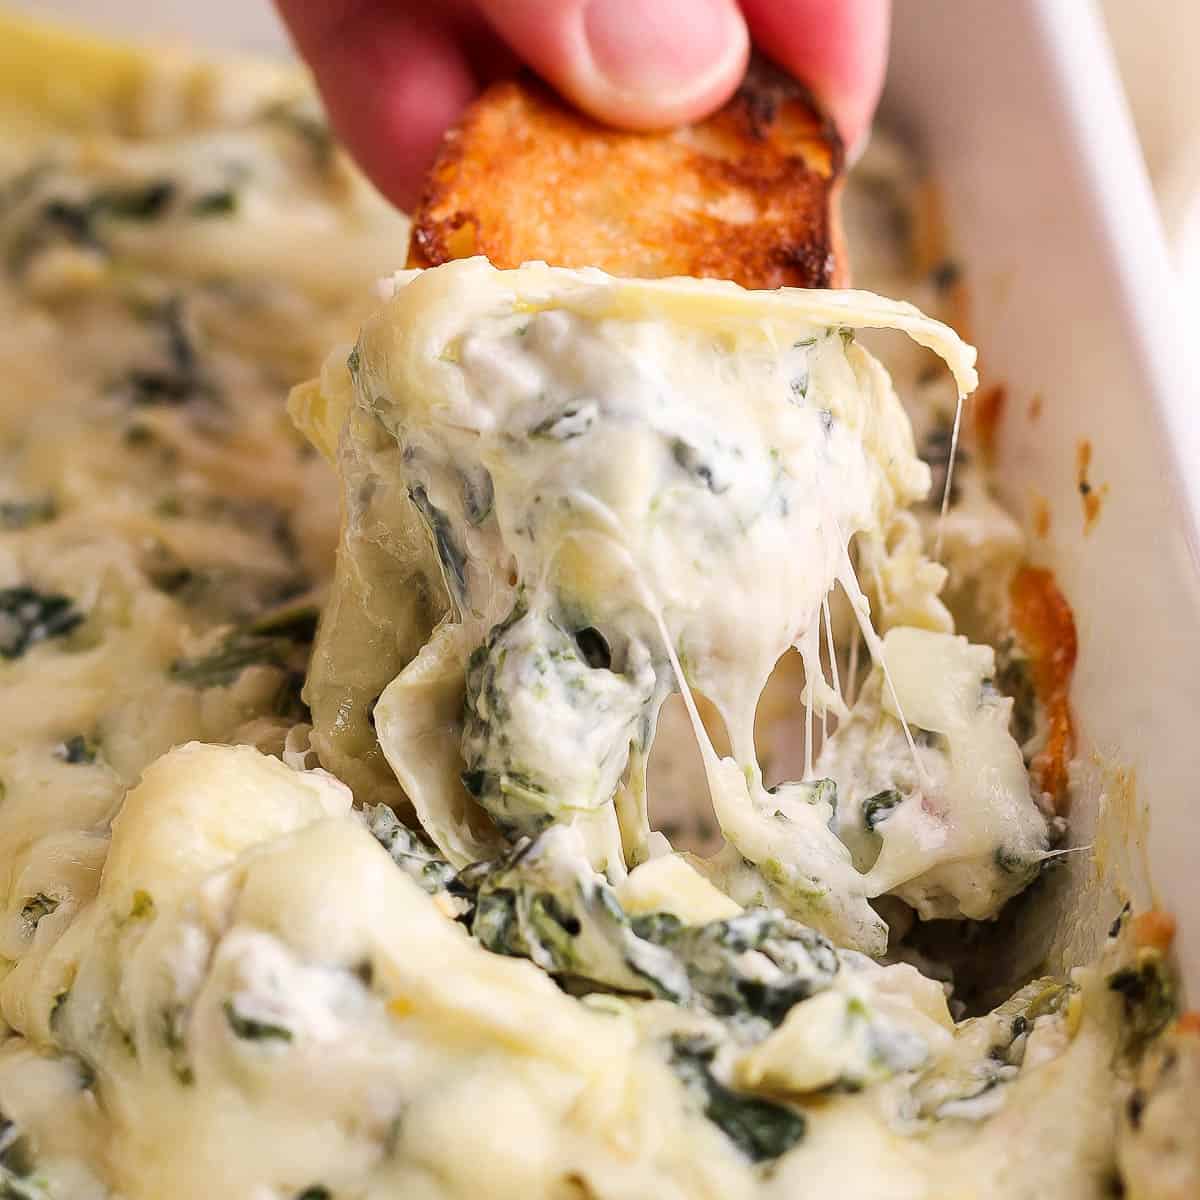 Someone using a piece of crostini to take a dip of spinach artichoke dip out of a baking dish.